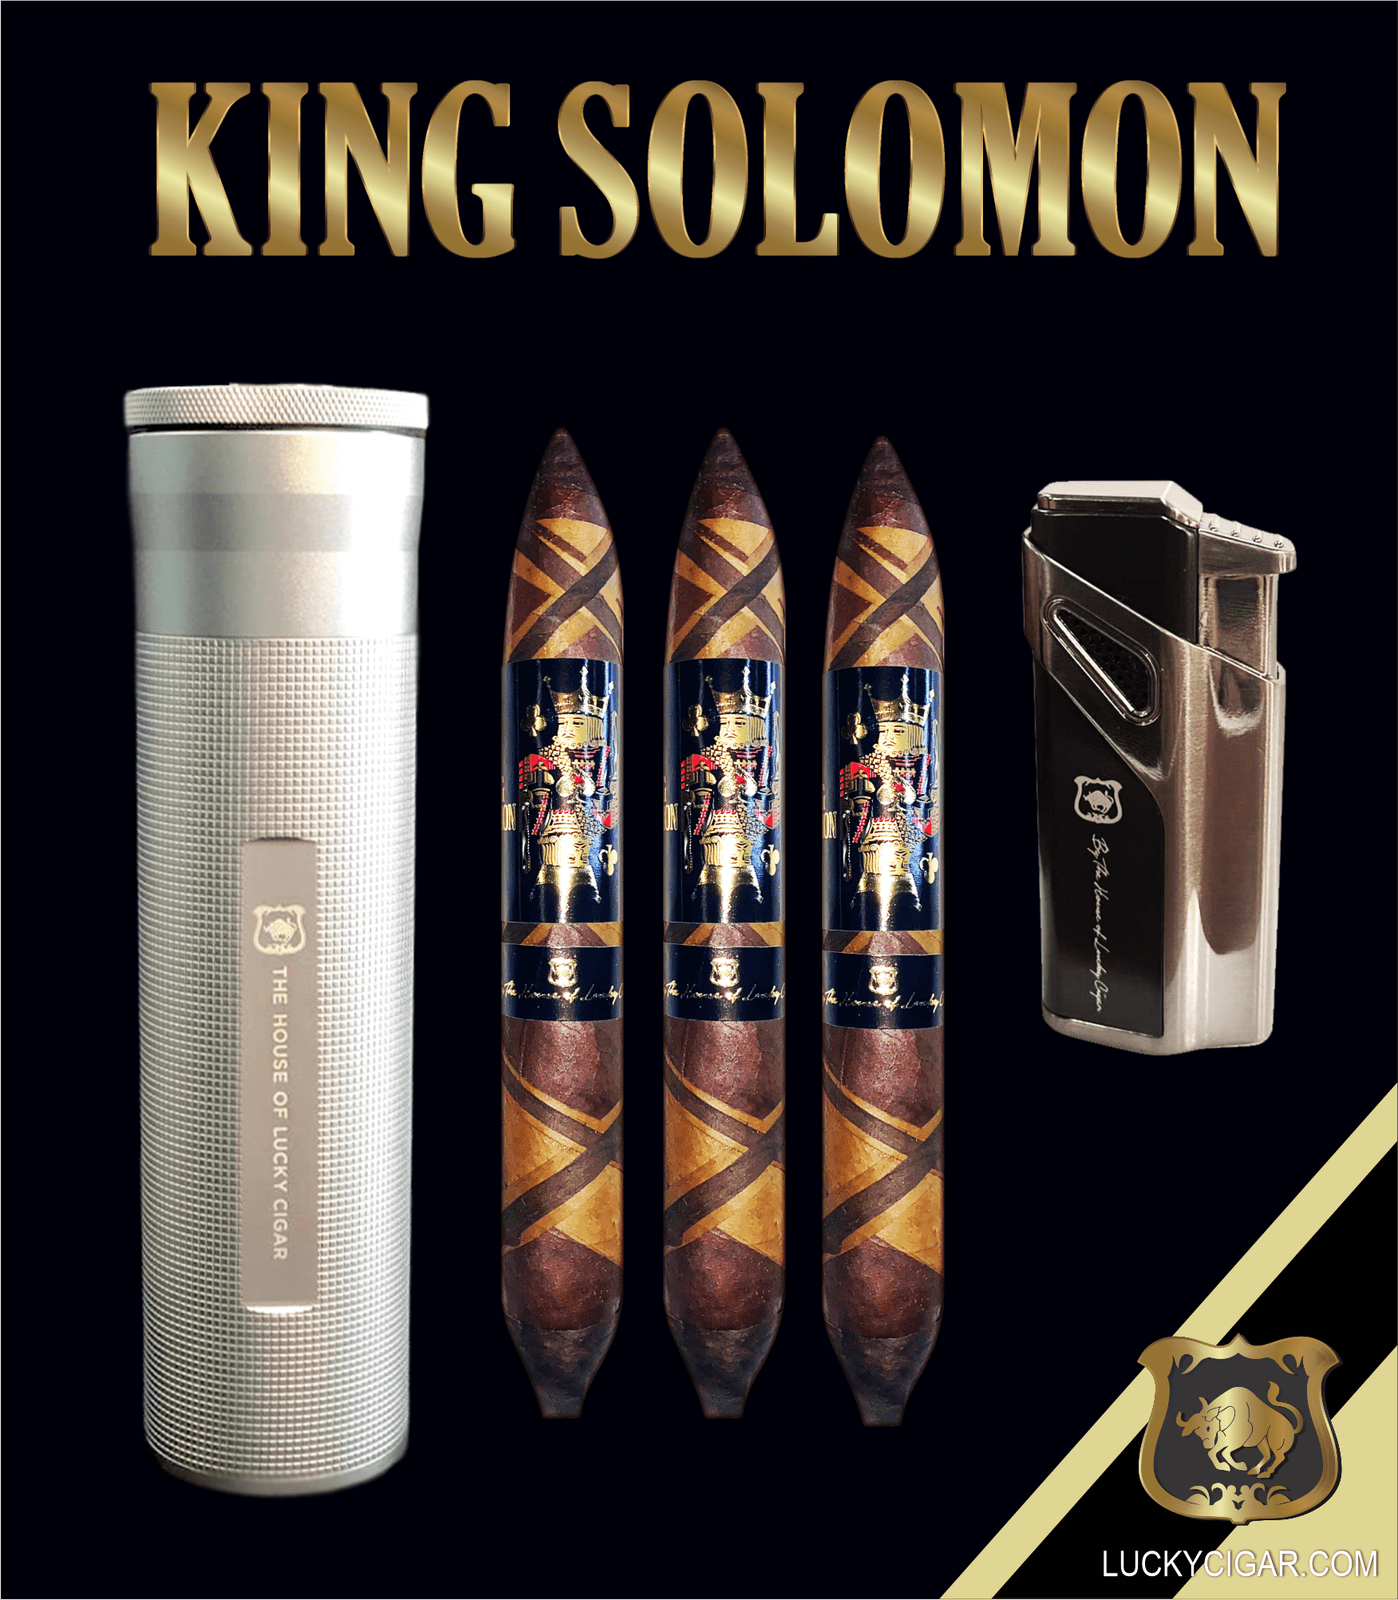 From The King Solomon Series: 3 Solomon 7x60 Cigars with Torch and Humidor Set